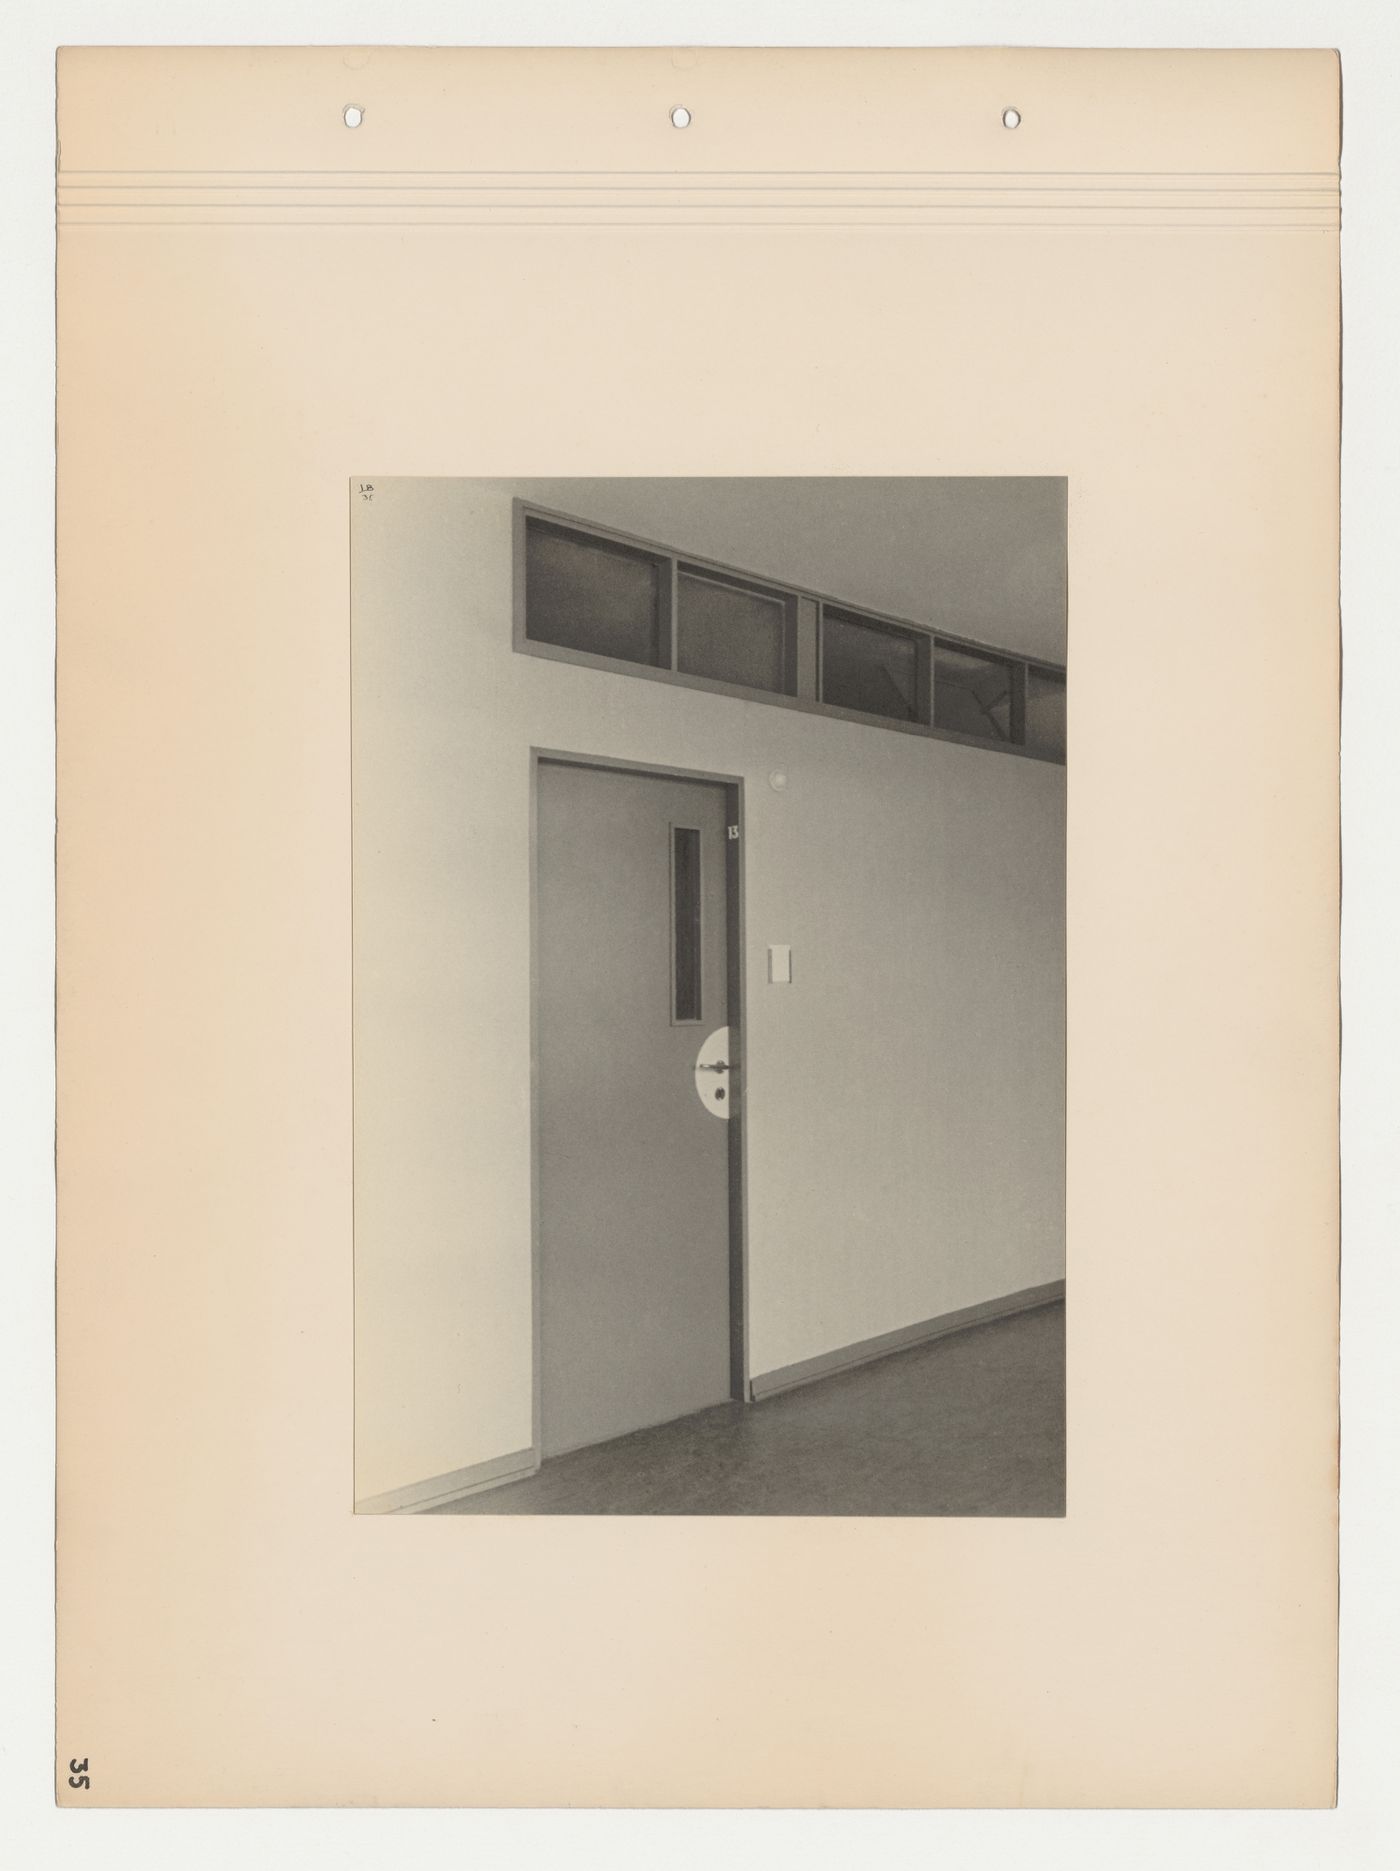 Interior view of a corridor and apartment door, Budge Foundation Old People's Home, Frankfurt am Main, Germany